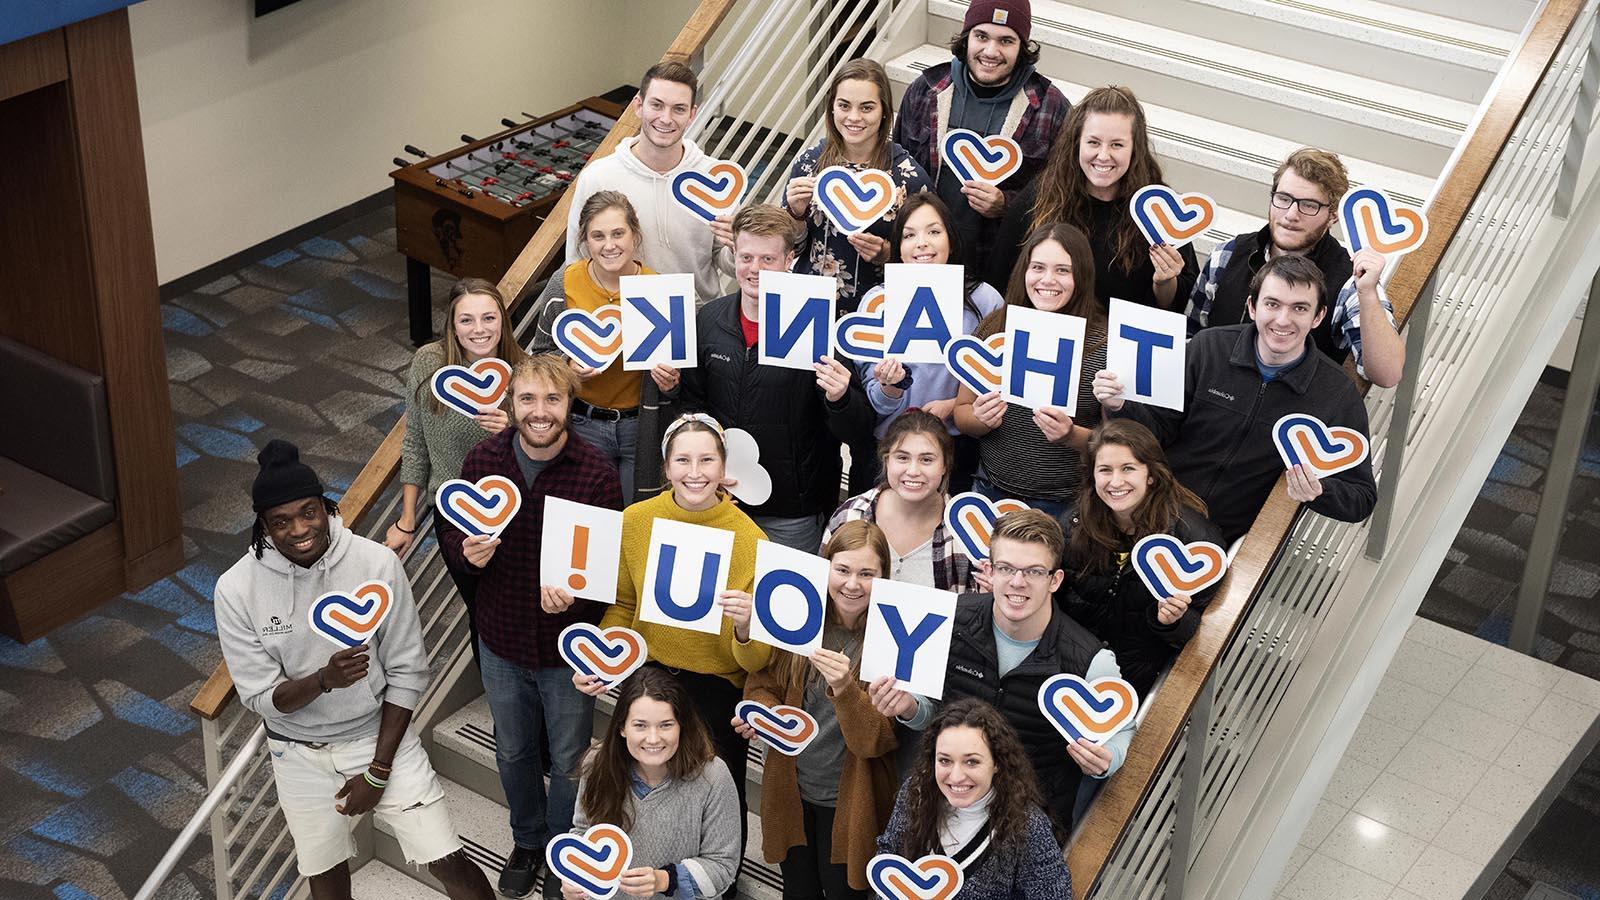 Group of University of Mary students holding letters that spell out “thank you!”